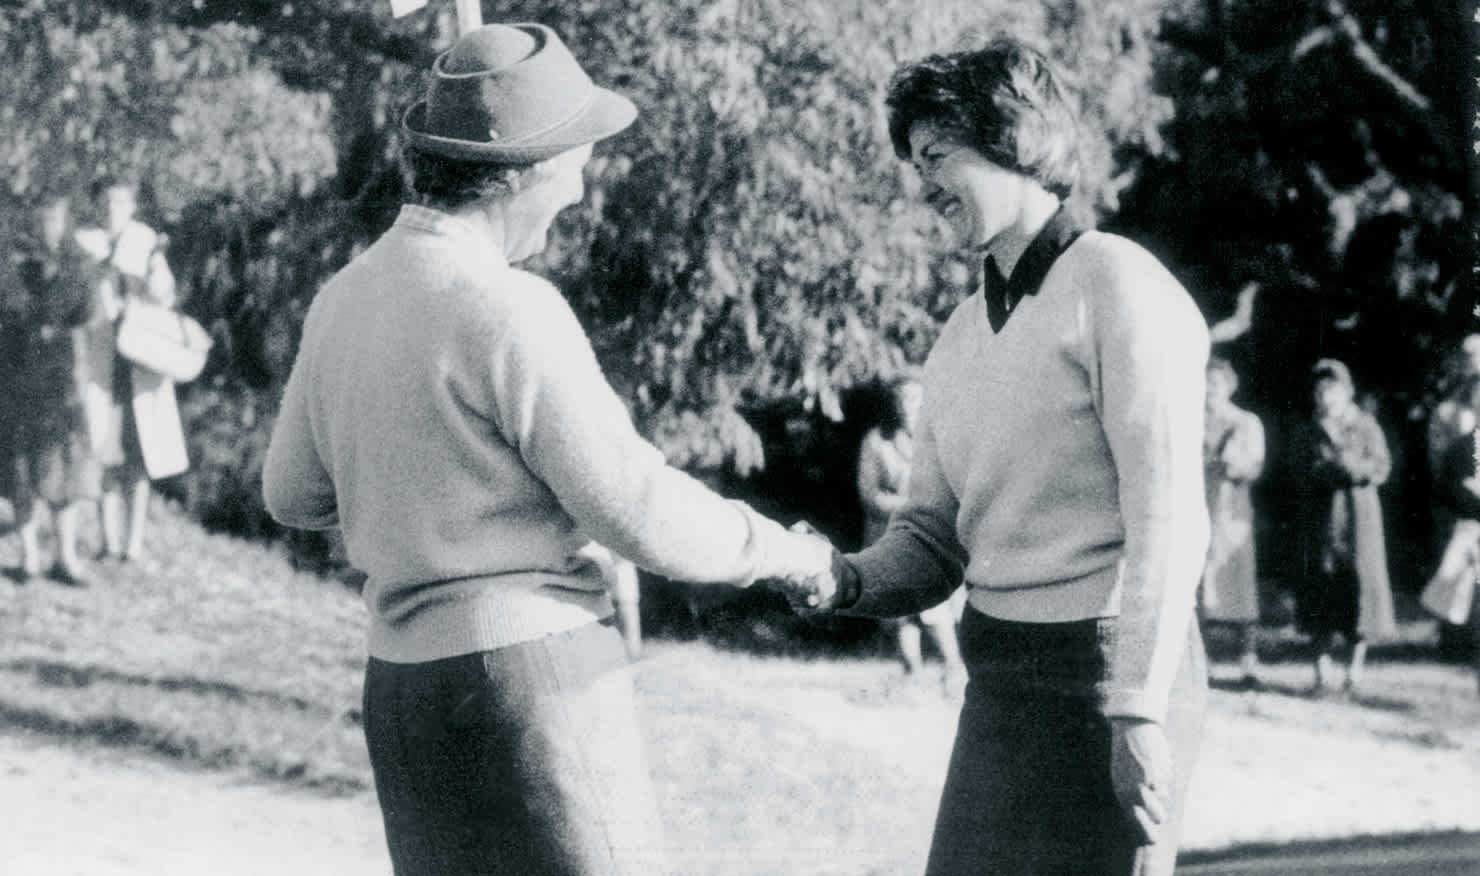 The victorious Margie Masters (right) shakes hands with Burtta Cheney after the 1962 Victorian Women’s Amateur Championship final. Picture: Golf Society Australia, first published in the GSA journal 